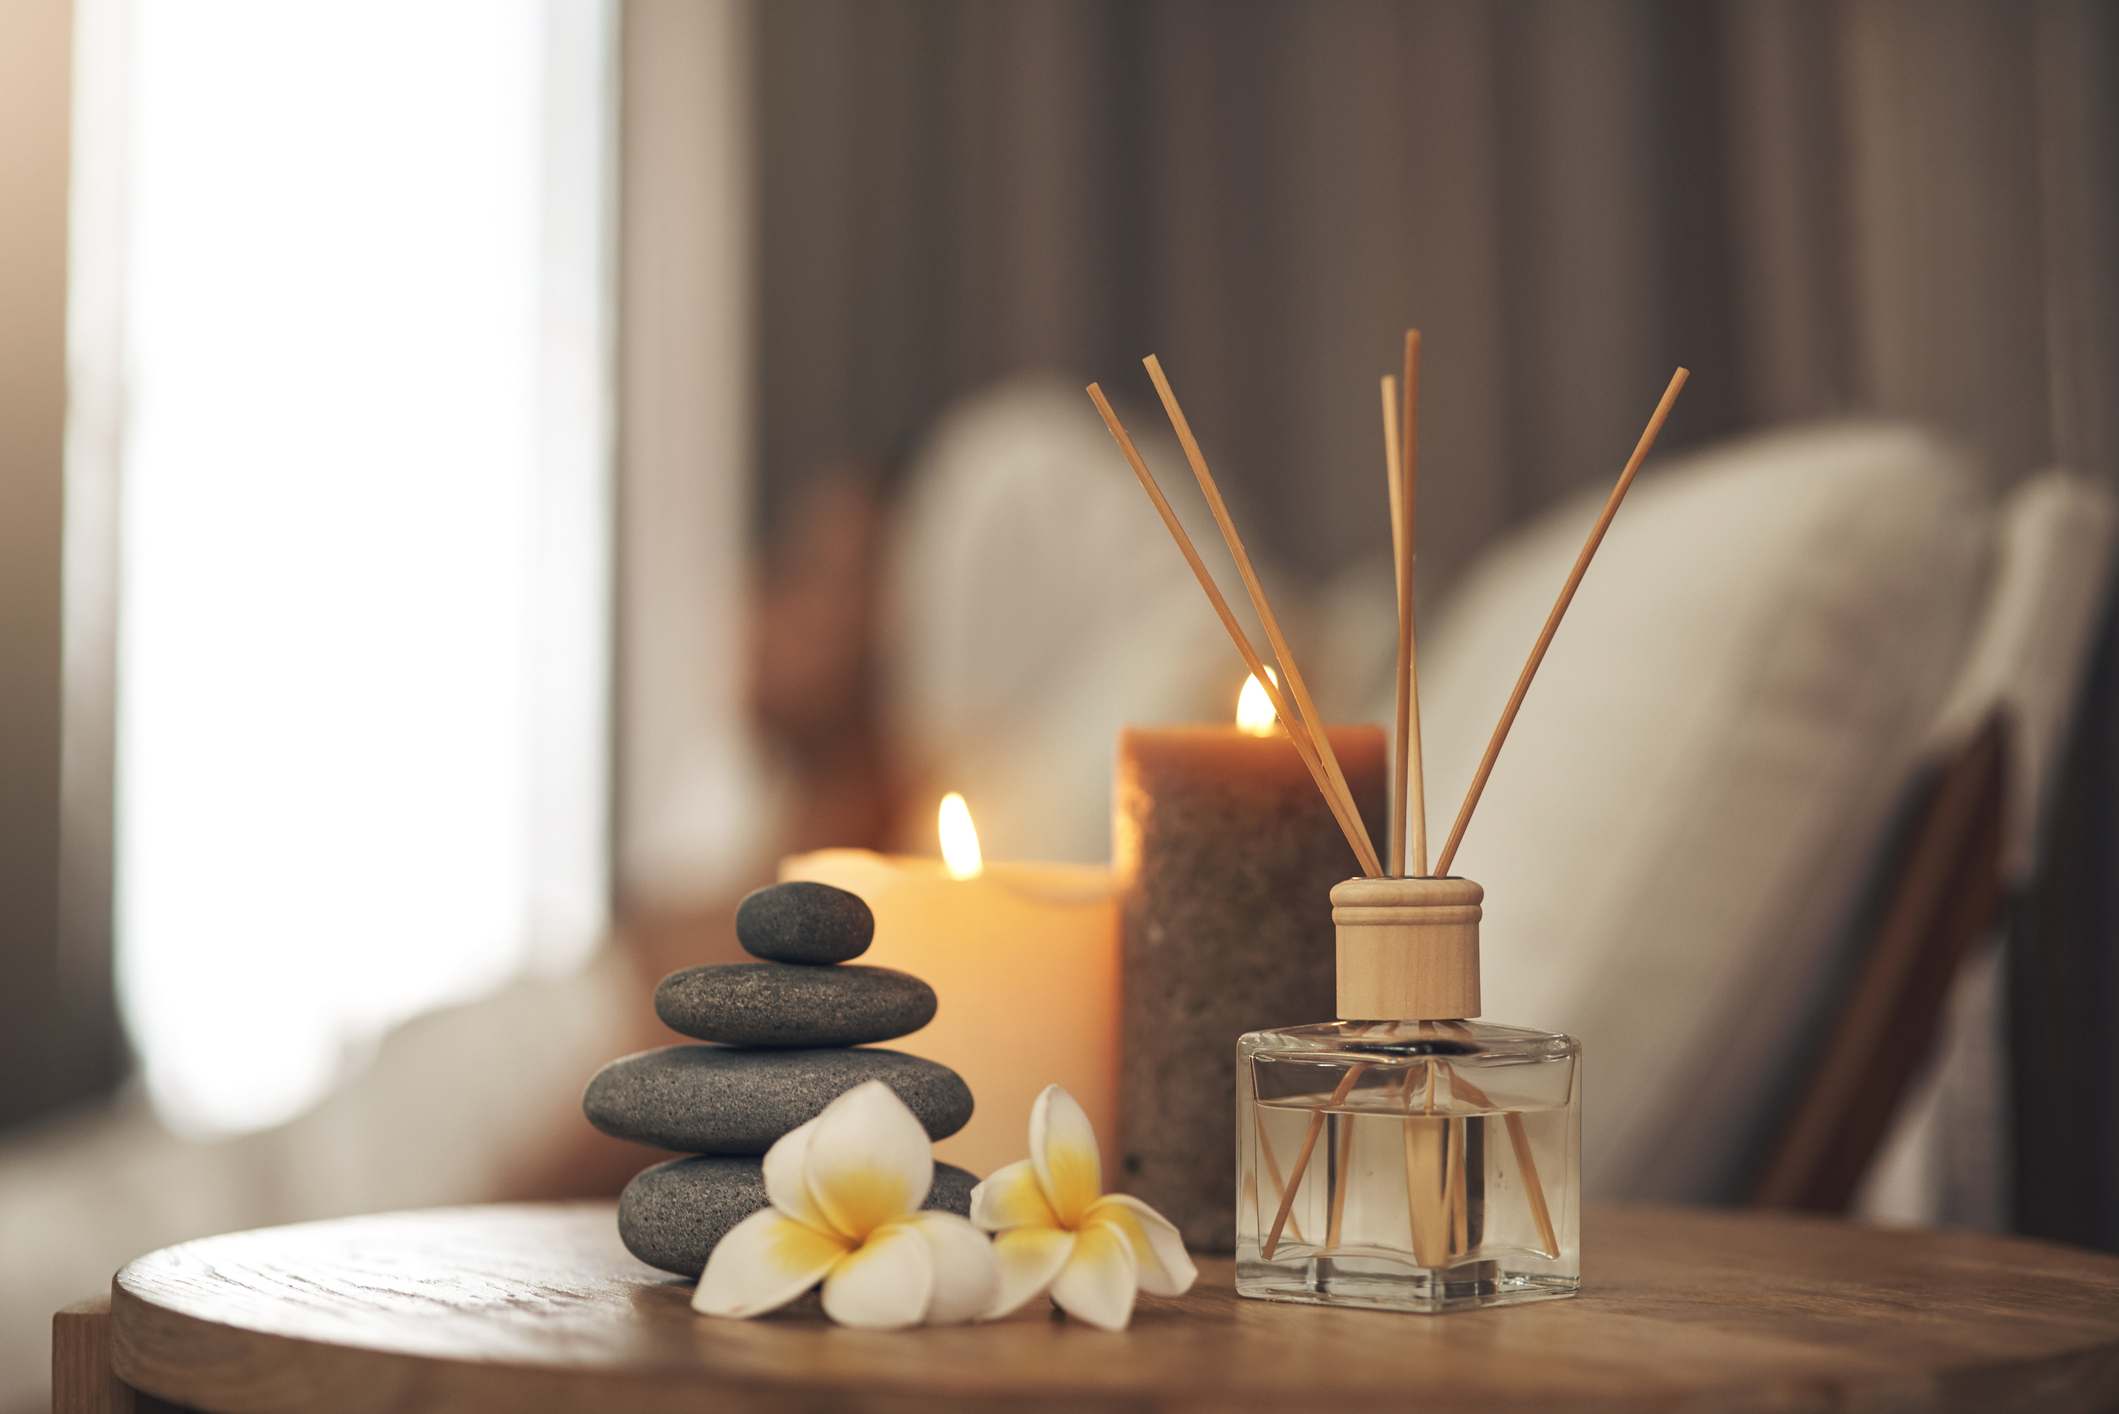 Relax and Rejuvenate with Body Massages at Massage Envy in Frisco